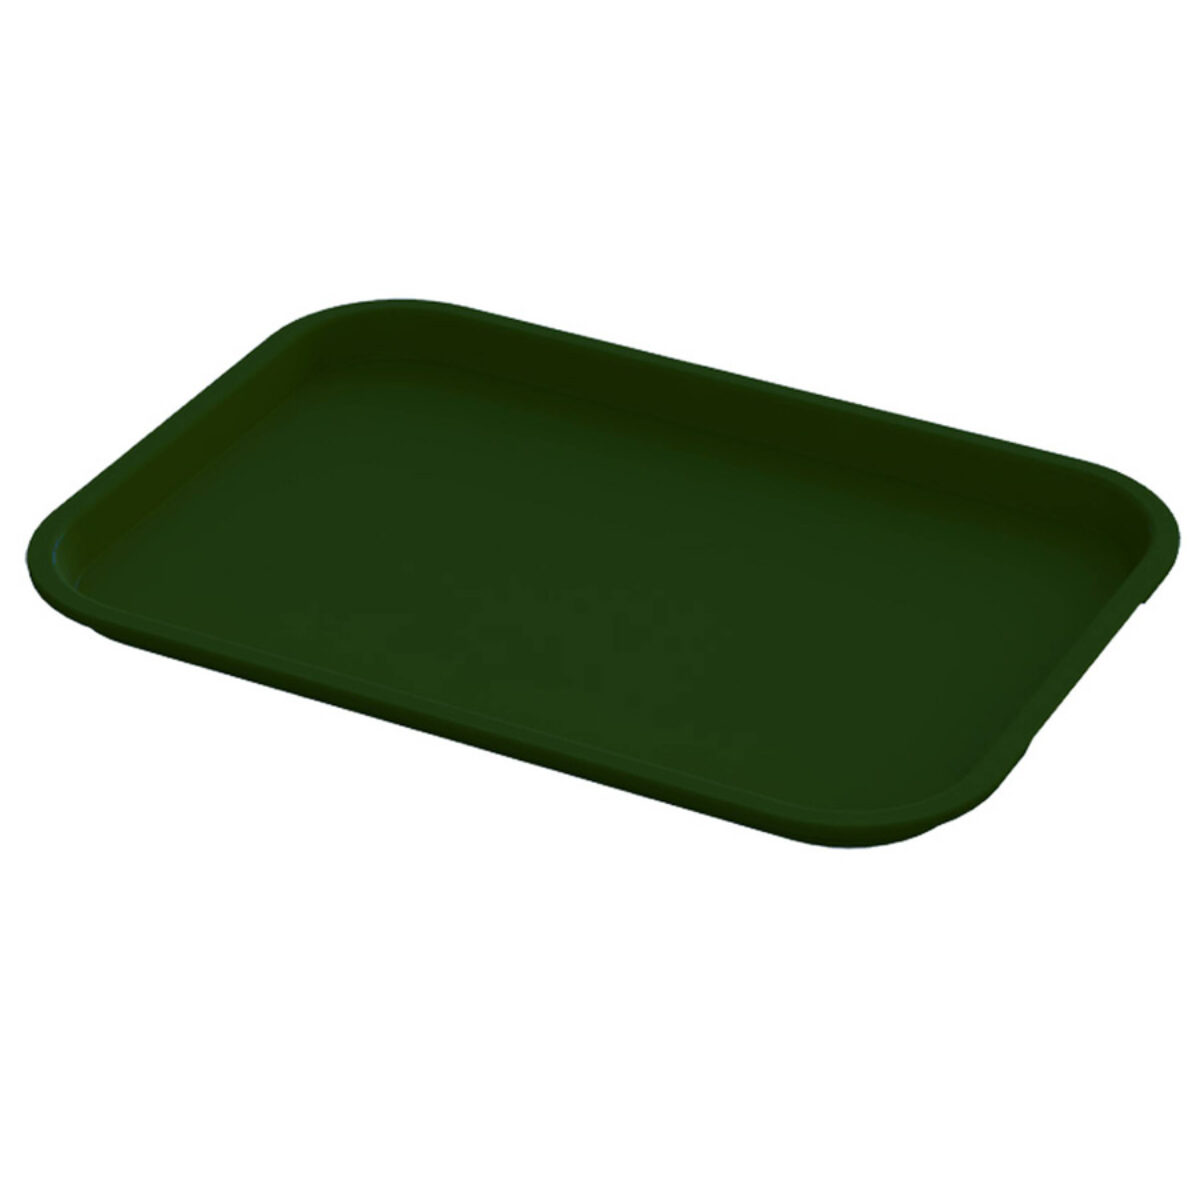 https://doyleshamrock.com/main/wp-content/uploads/schema-and-structured-data-for-wp/green-plastic-serving-trays-14-x-18-inch-1200x1200.jpg